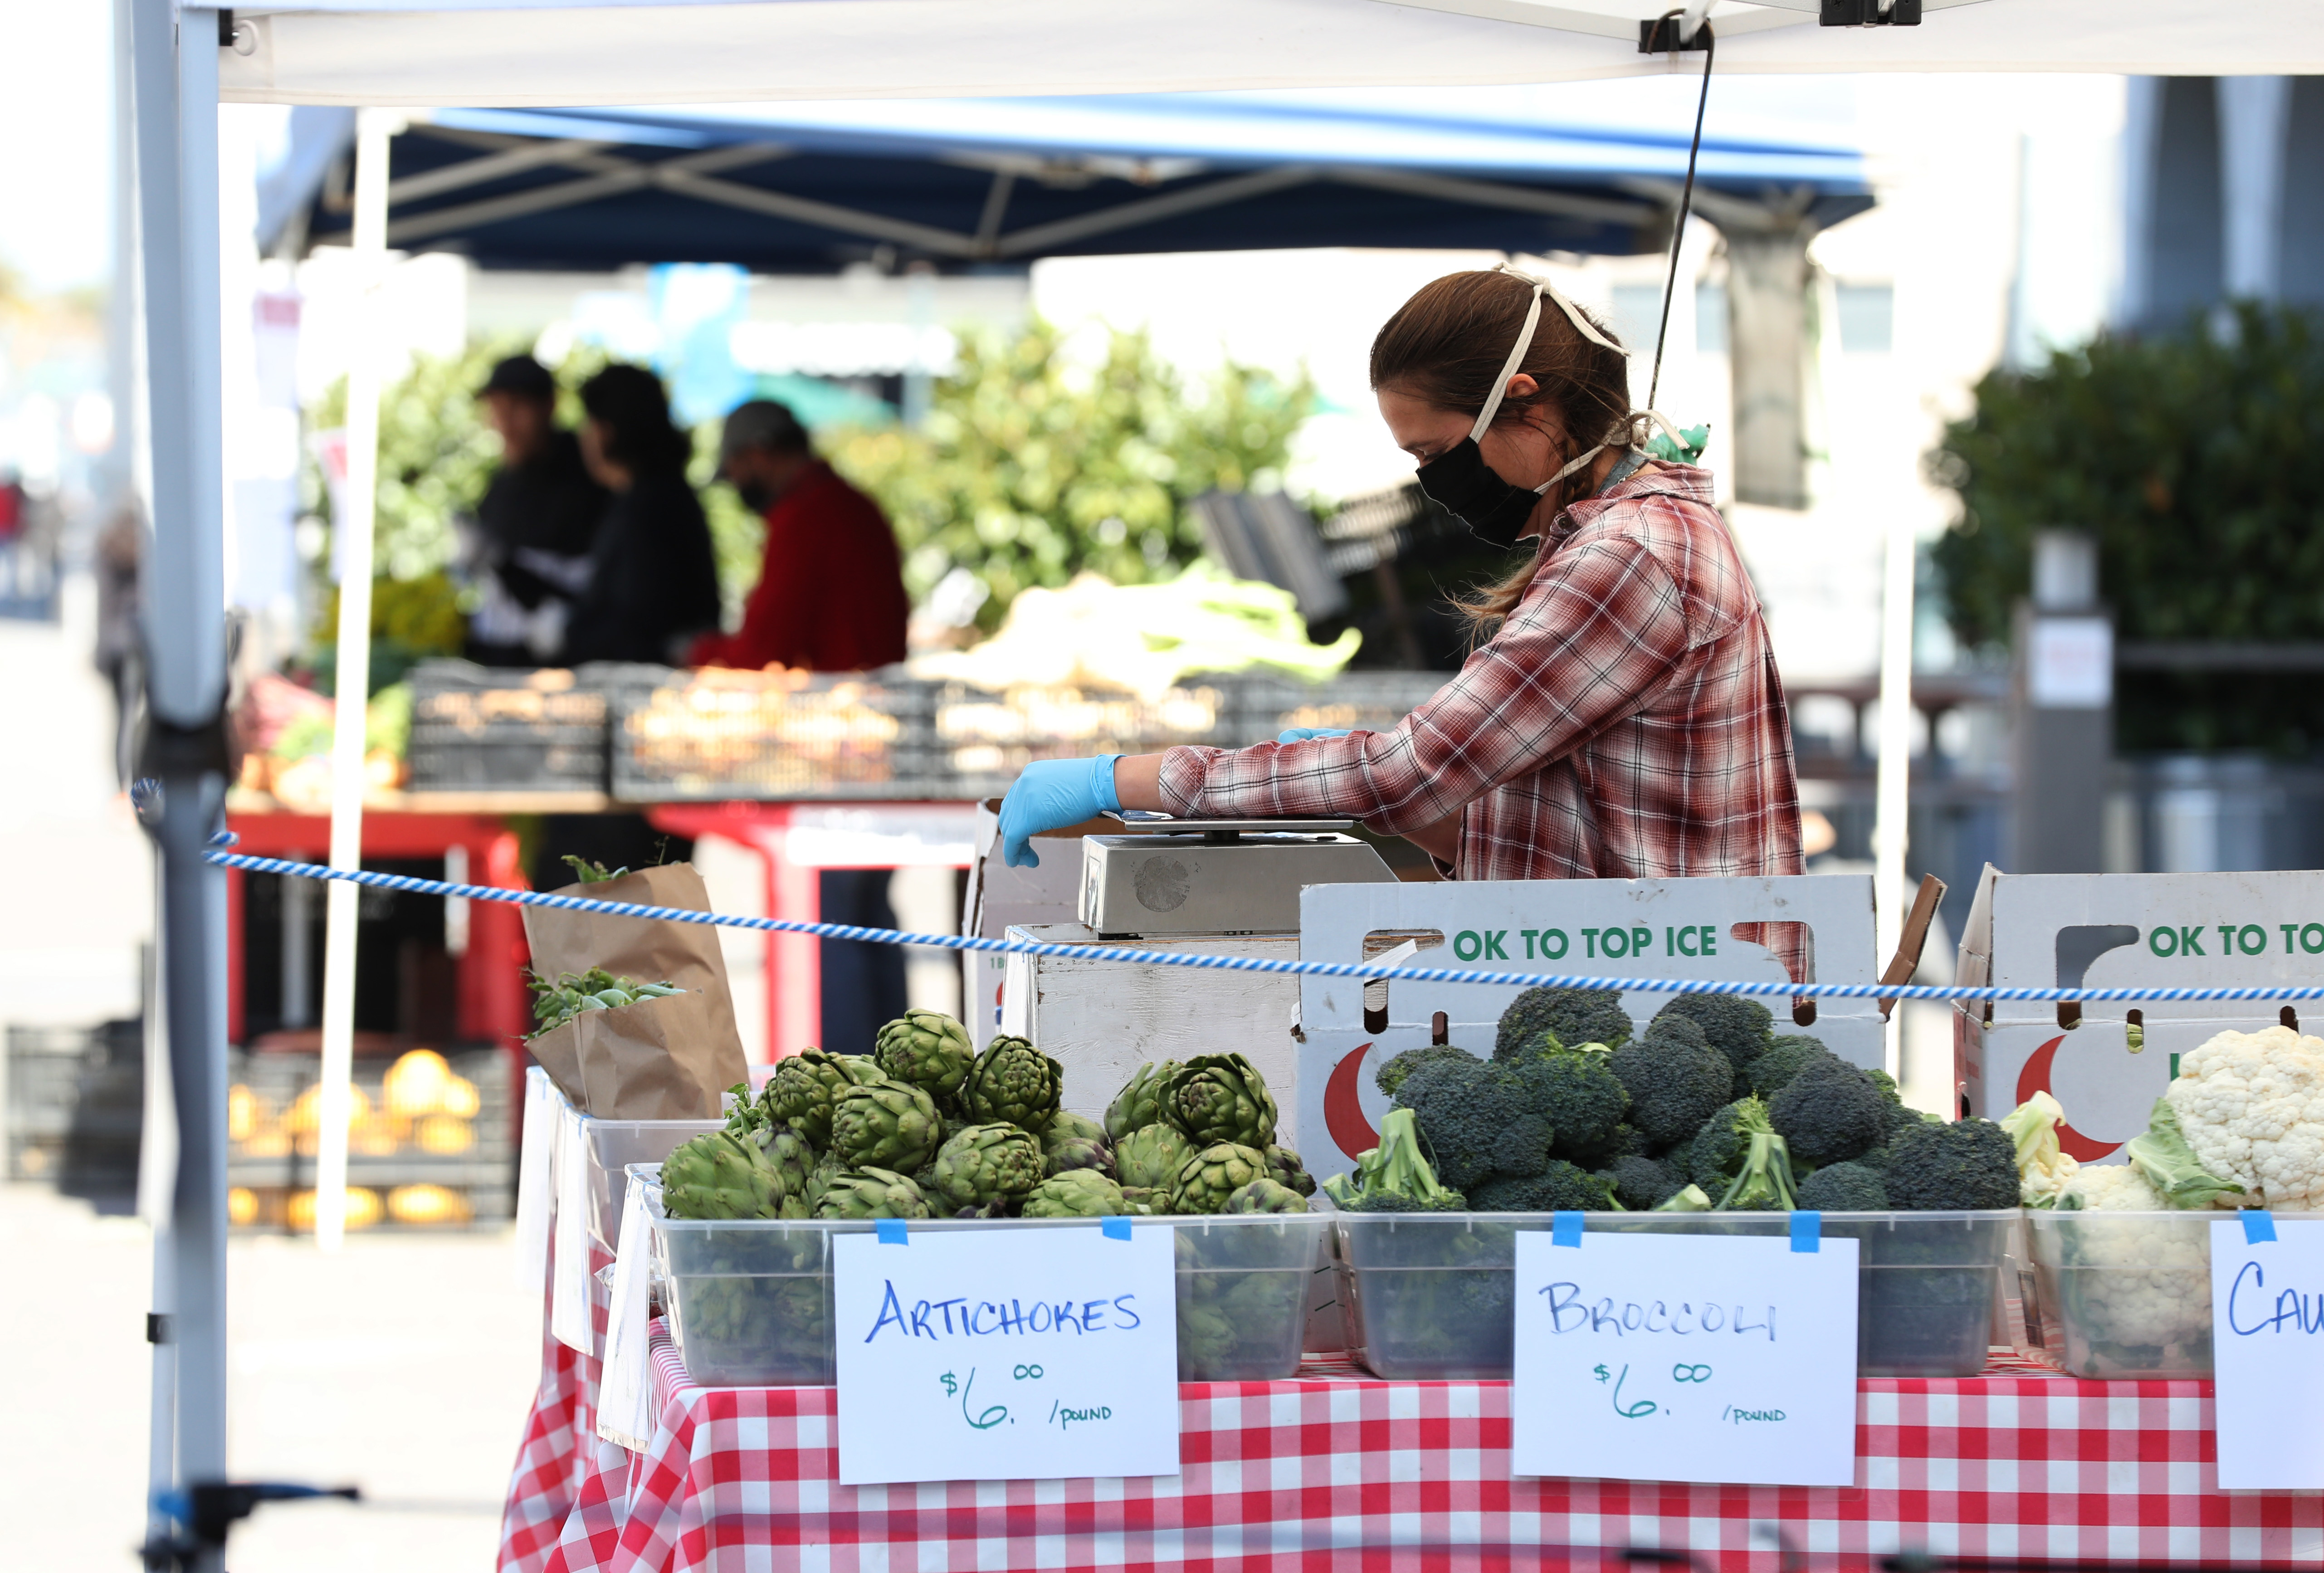 Farmers Markets Offer Safe Havens For Shoppers During COVID-19 Pandemic